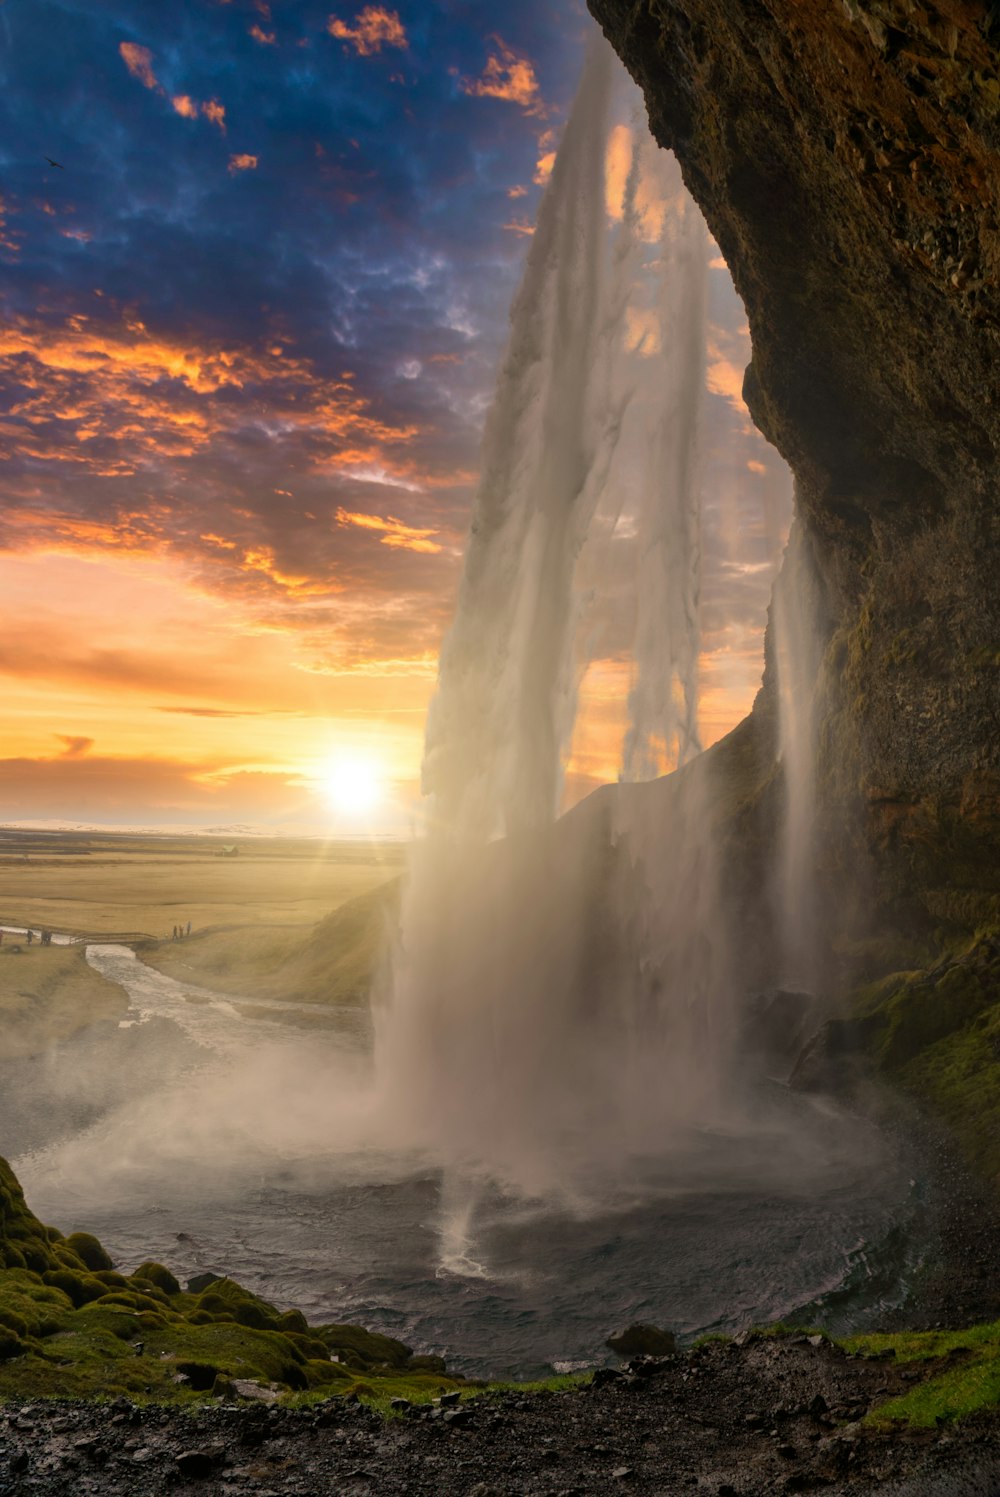 the sun is setting behind a waterfall